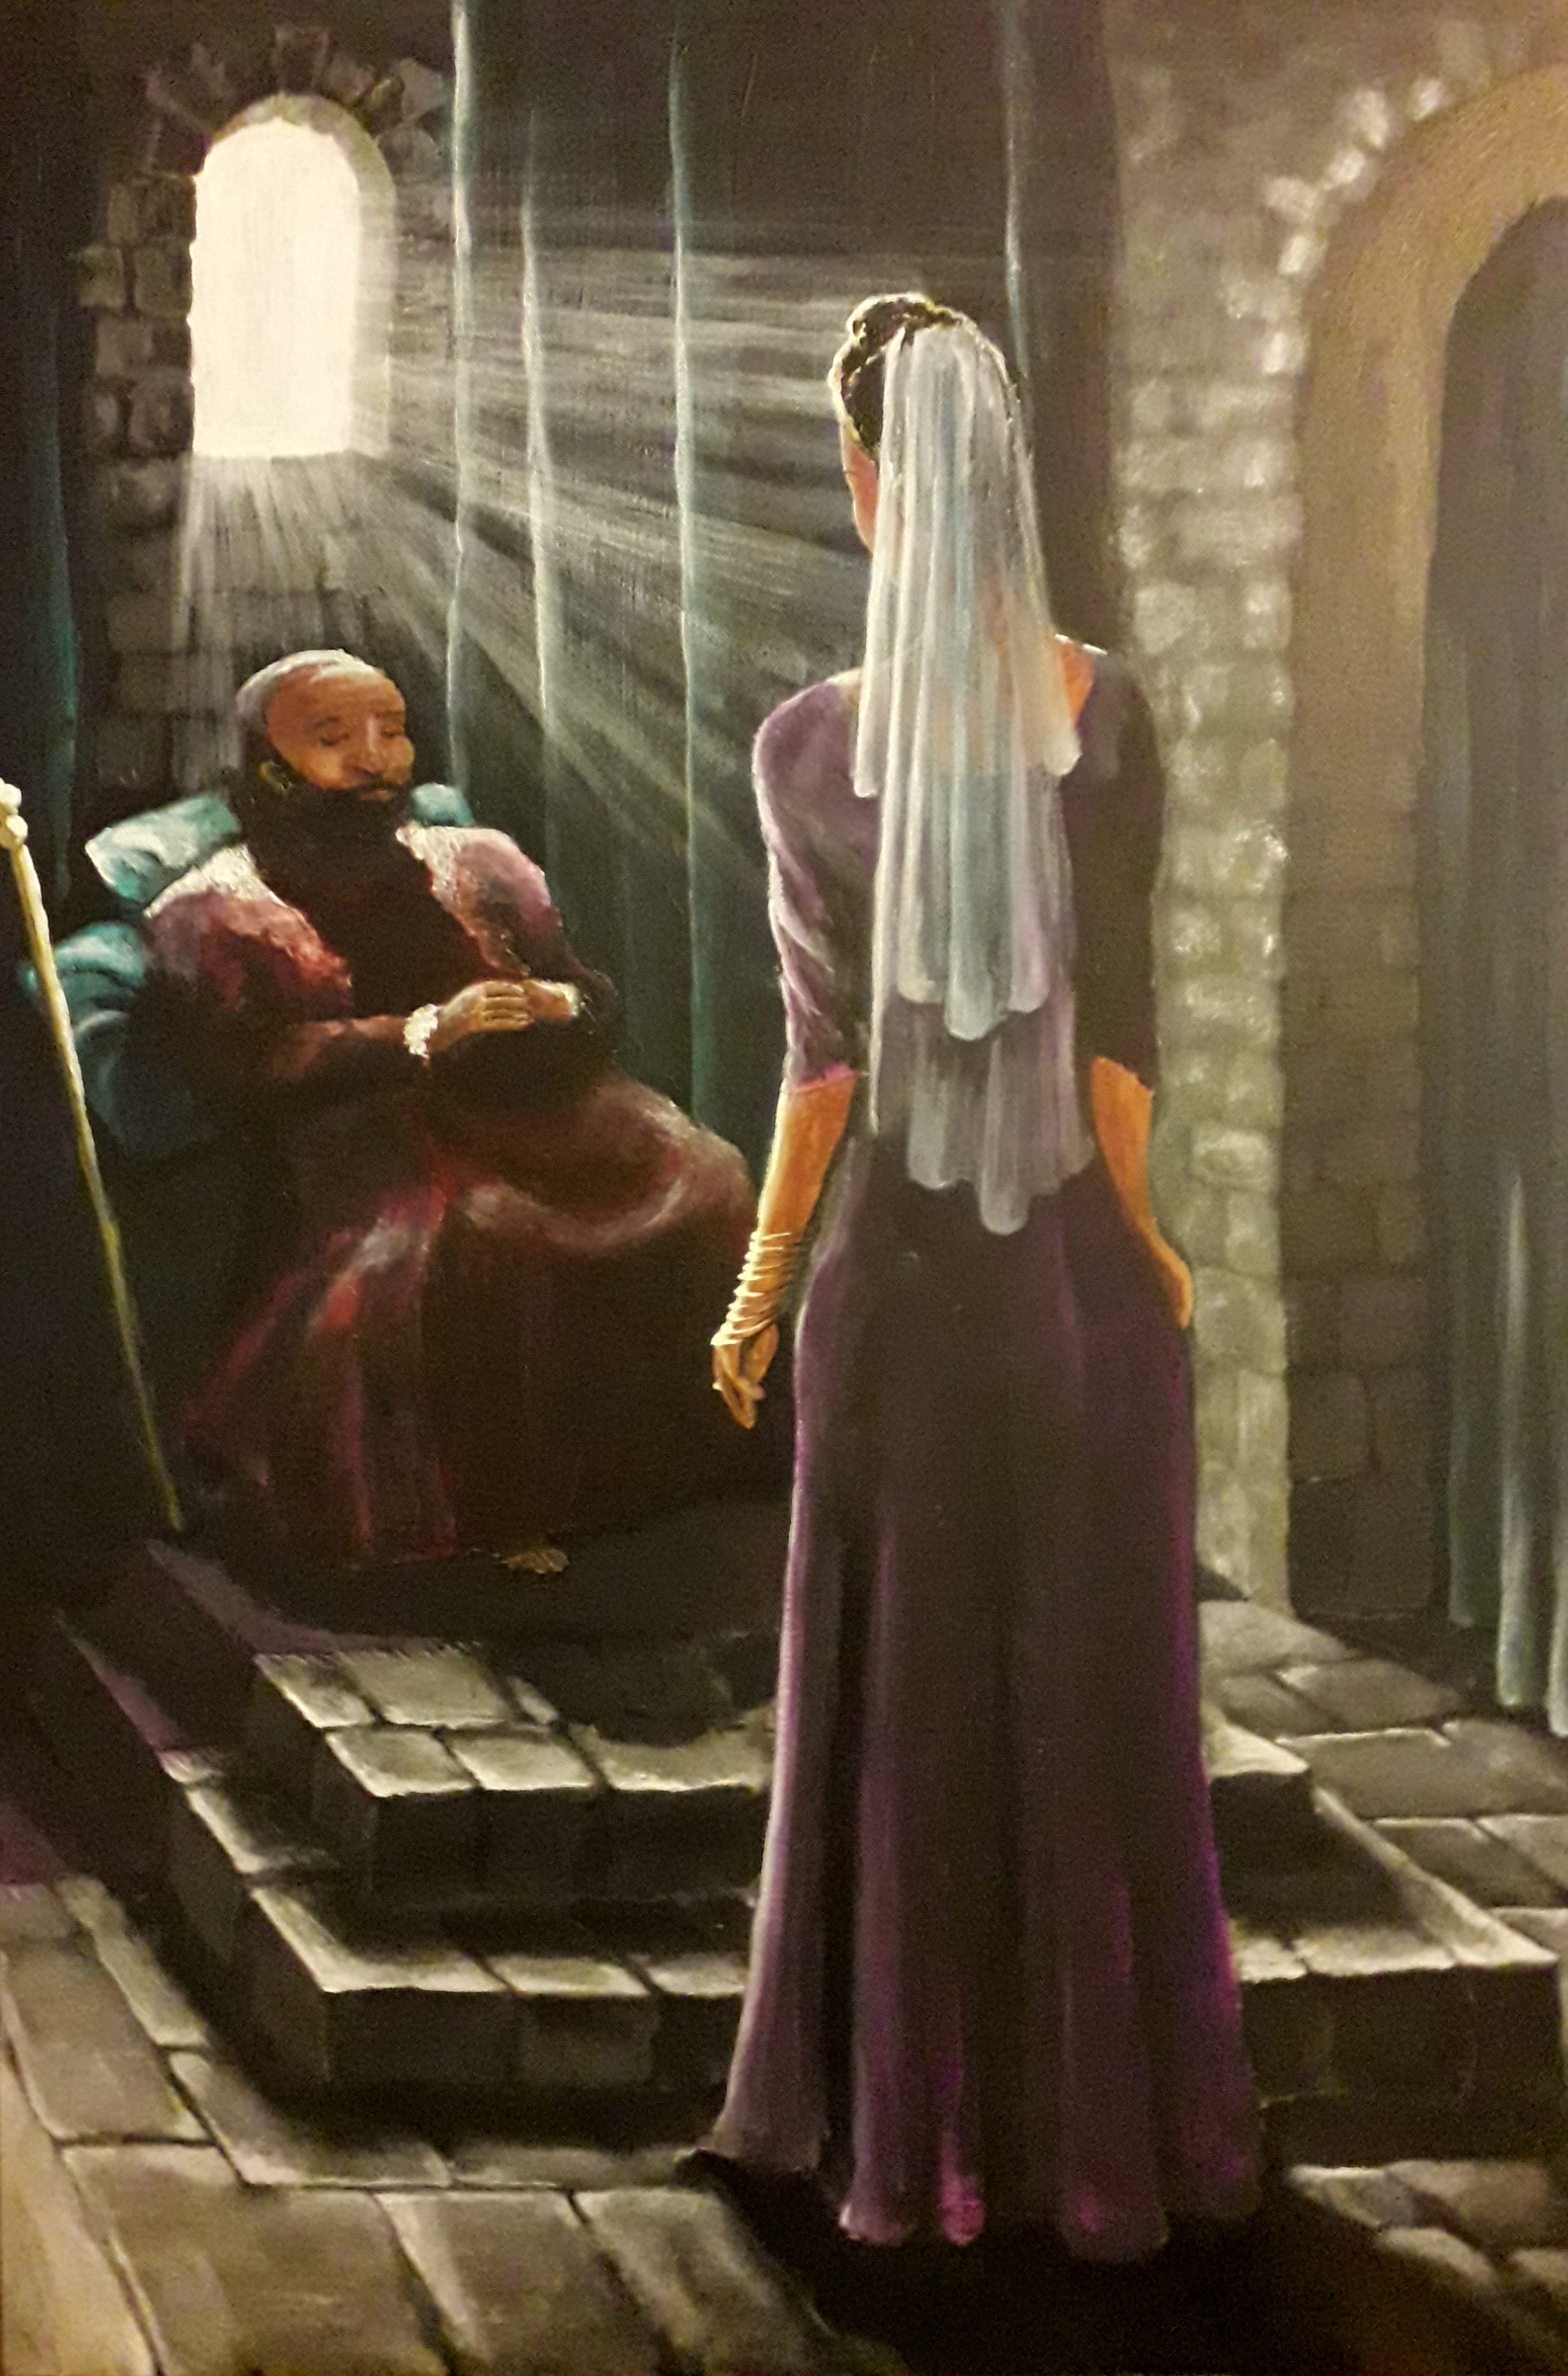 The moment in the book of Esther when she stands before Xerxes, before she has had to bow down to him. Sunlight comes through a window to illuminate her, while he is in shadow.